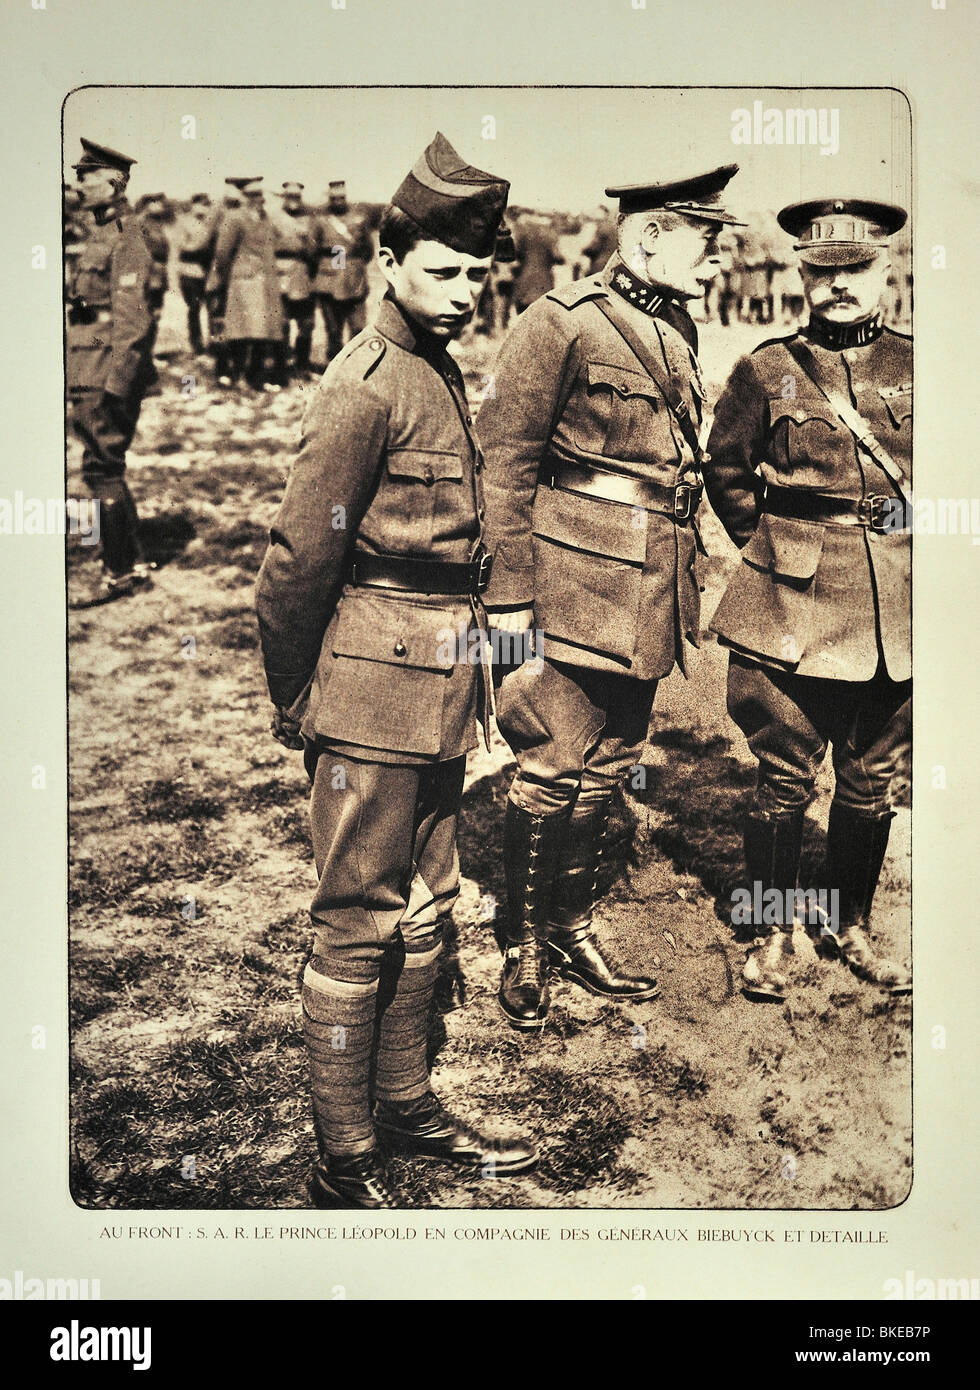 Prince Leopold III and the generals Aloise Biebuyck and Detaille visiting the battlefield in Flanders, First World War, Belgium Stock Photo